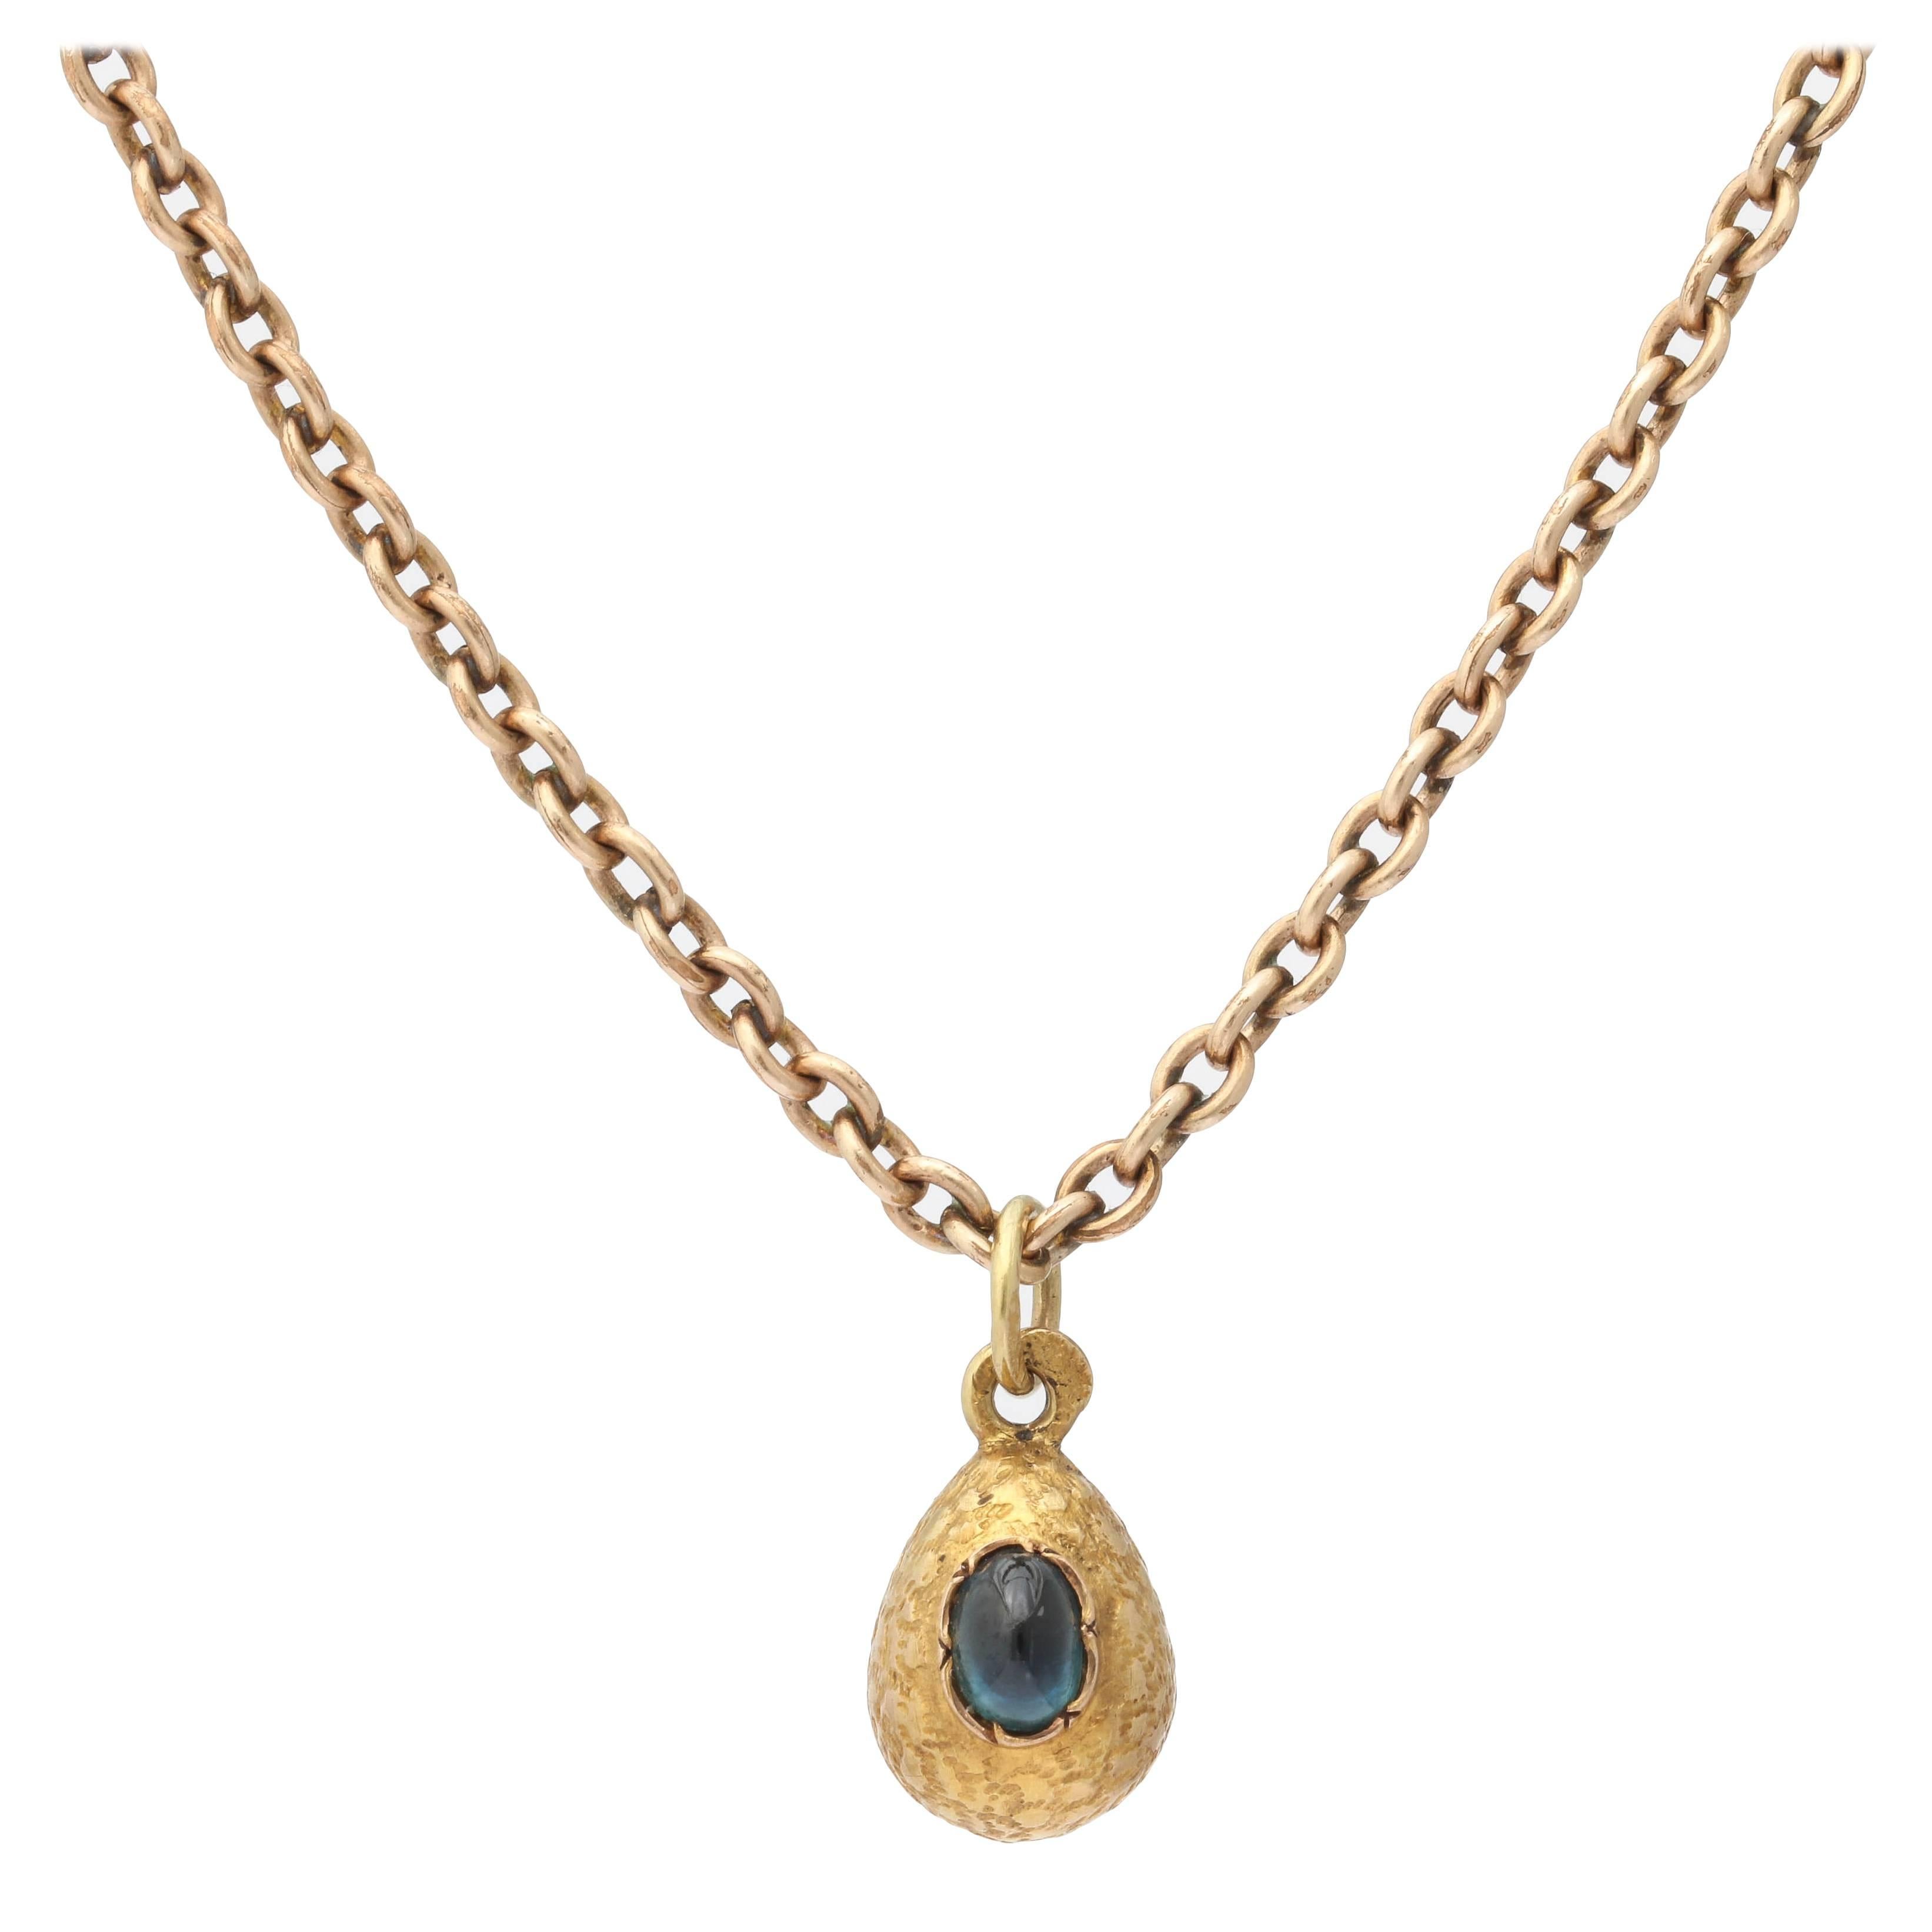 Small 1900s Russian Sapphire Gold Easter Egg Pendant